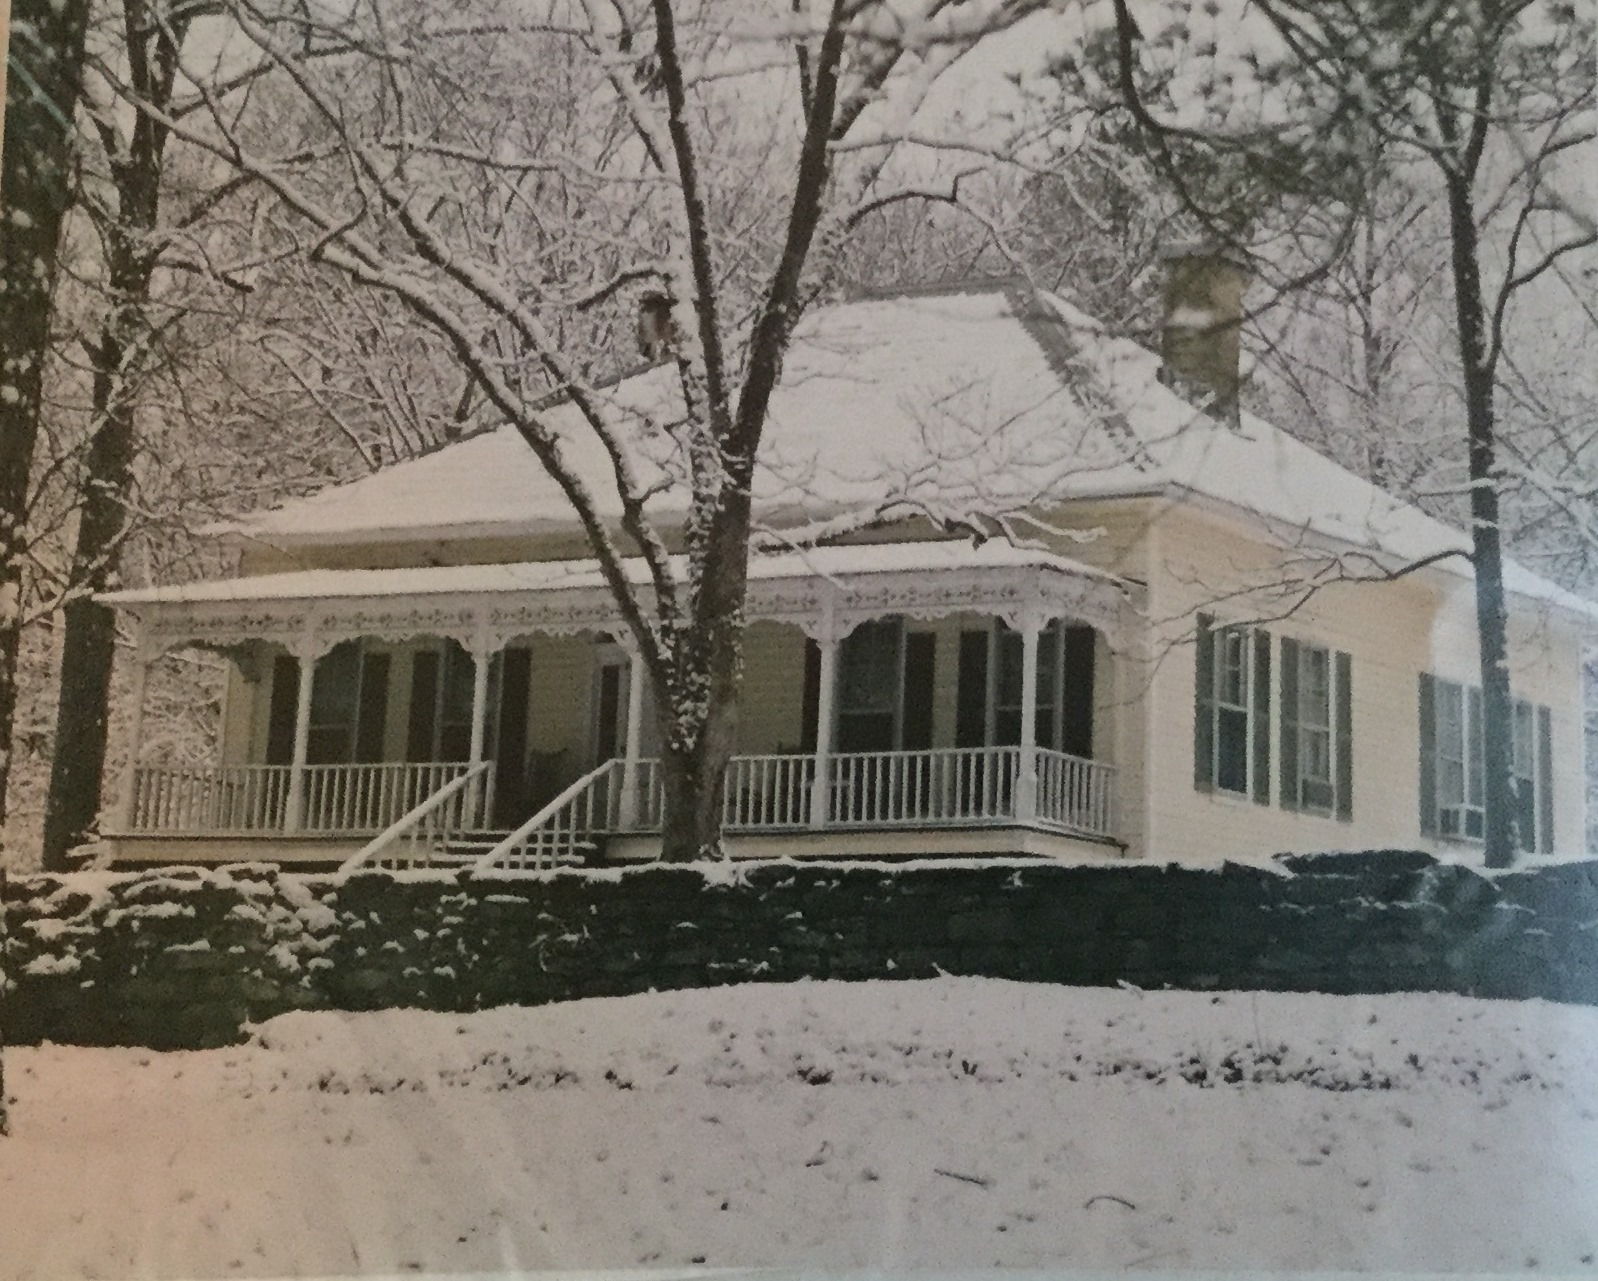 Cowden home, which stands today on the old Byler Road (Old Highway 43)